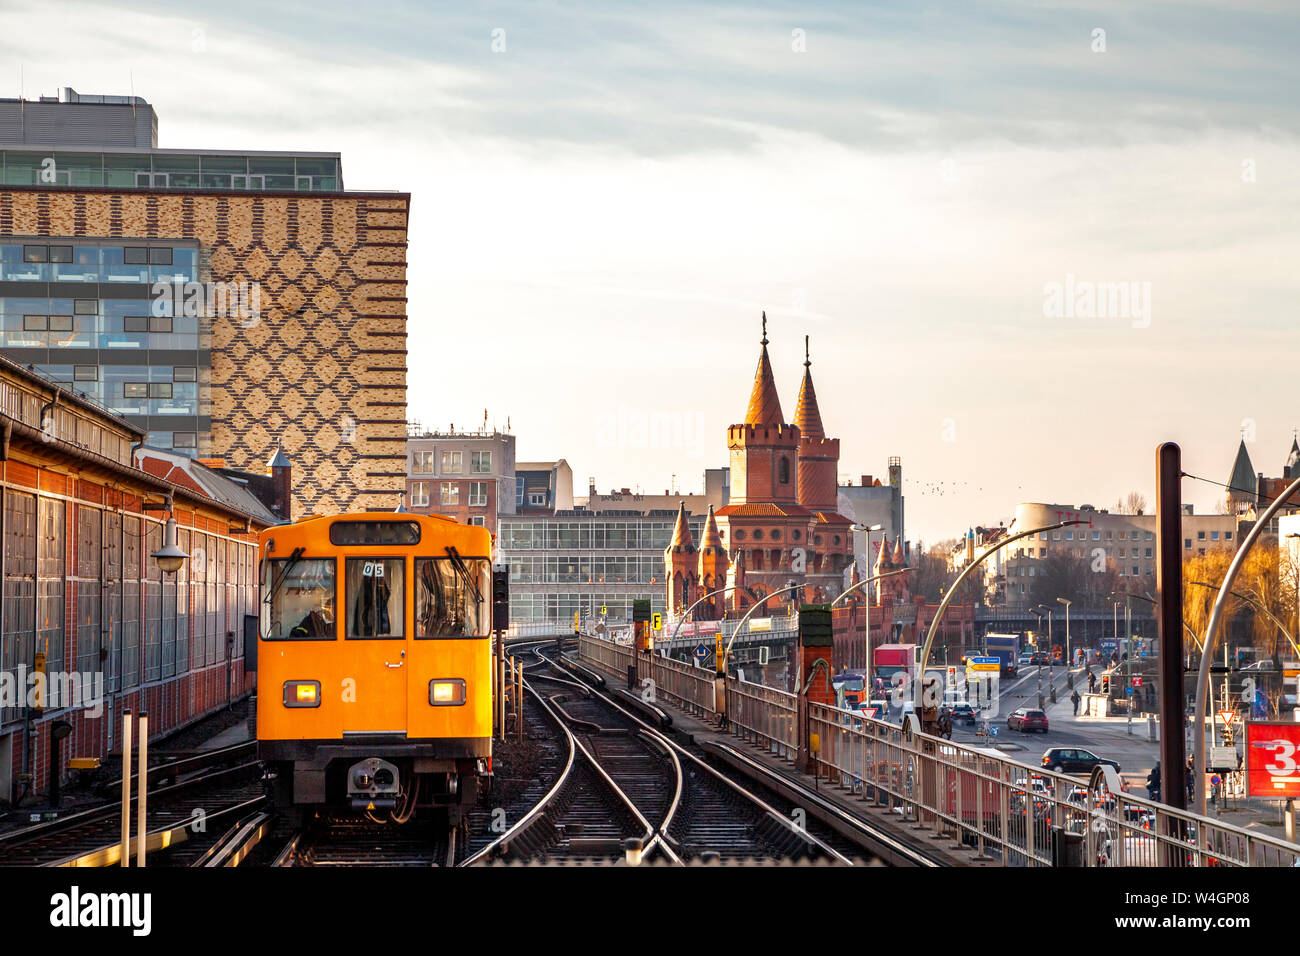 Train in elevated railway in front of Oberbaum Bridge at twilight, Berlin, Germany Stock Photo